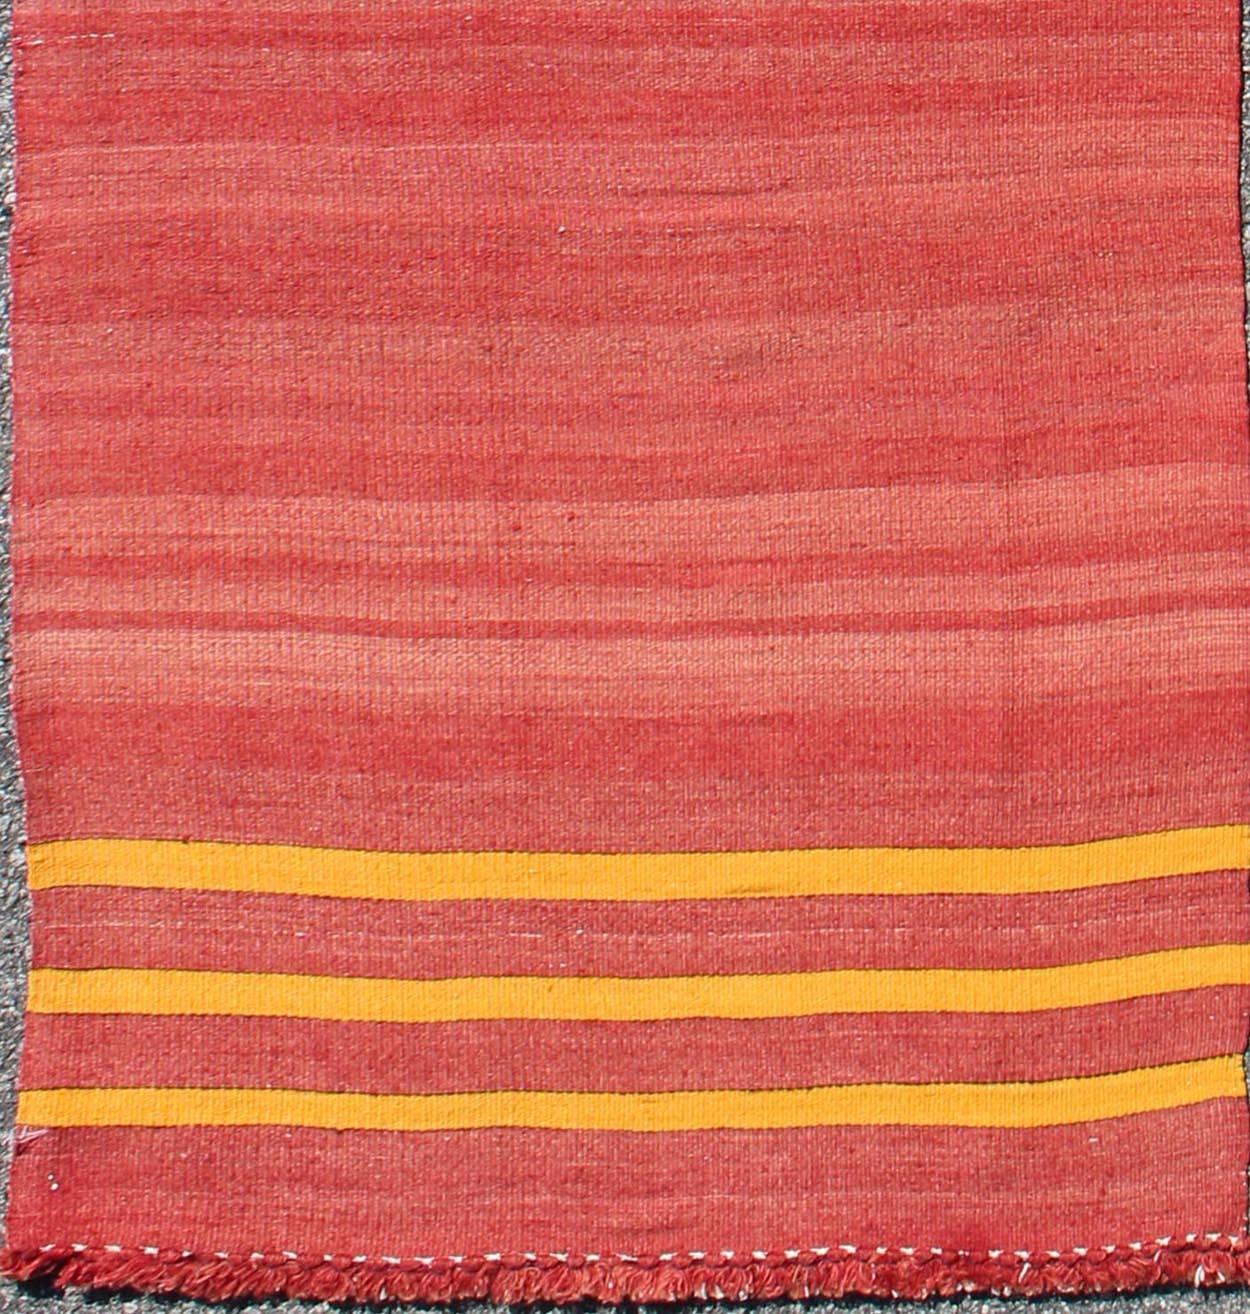 Red, yellow, and salmon pink striped midcentury vintage Turkish Kilim rug, rug ned-143, country of origin / type: Turkey / Kilim, circa mid-20th century

Featuring a repeating horizontal stripe design, this unique midcentury Kilim rug showcases an